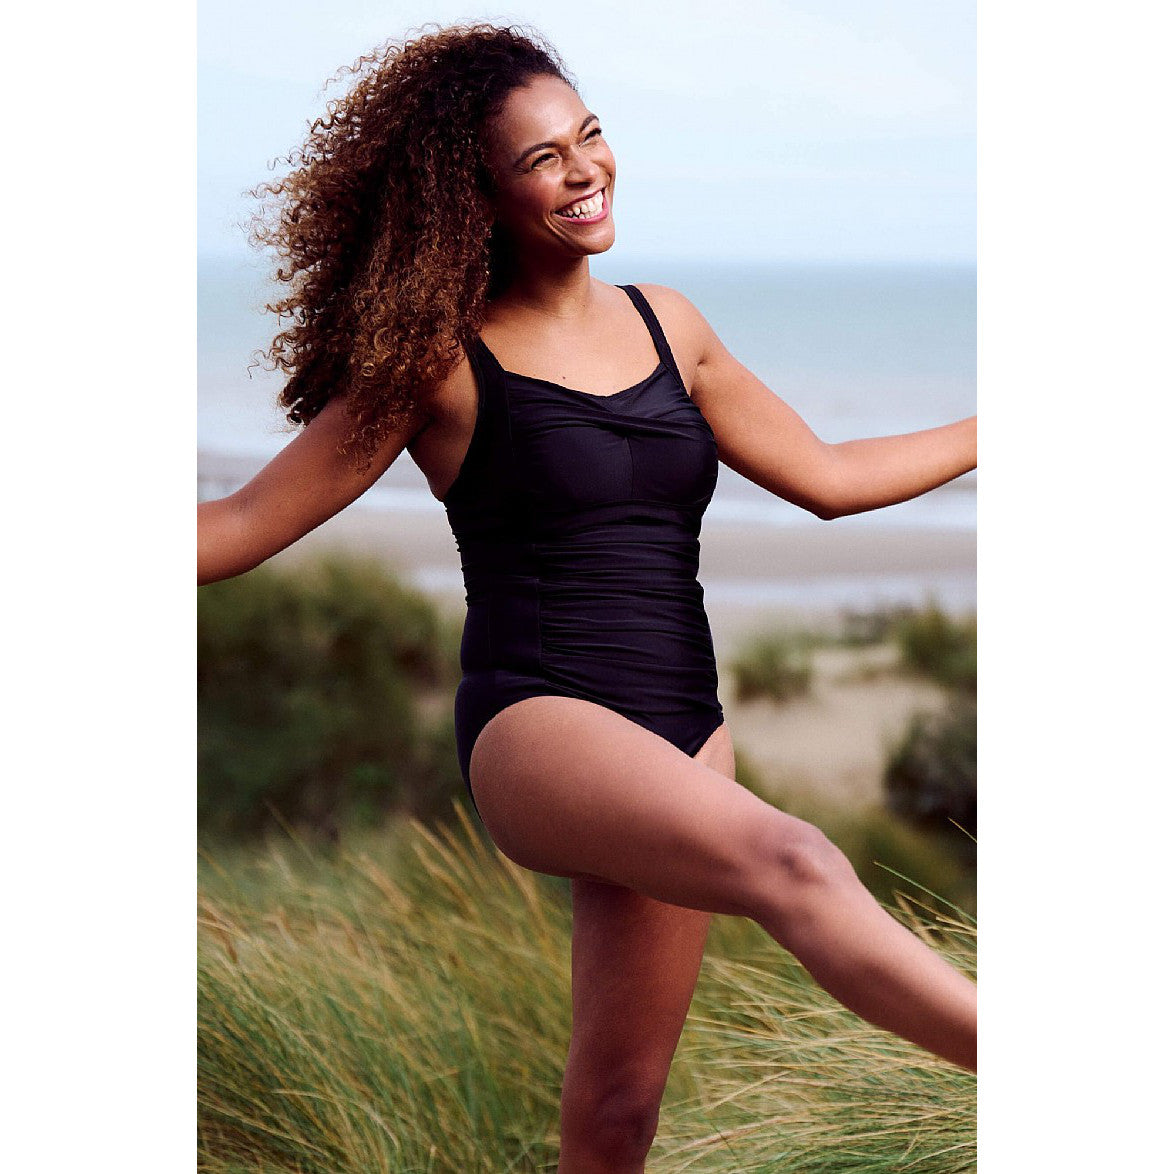 Wittering Ruched Swimsuit in black | Swimwear from Nicola Jane | Pocketed mastectomy swimwear for women touched by breast cancer